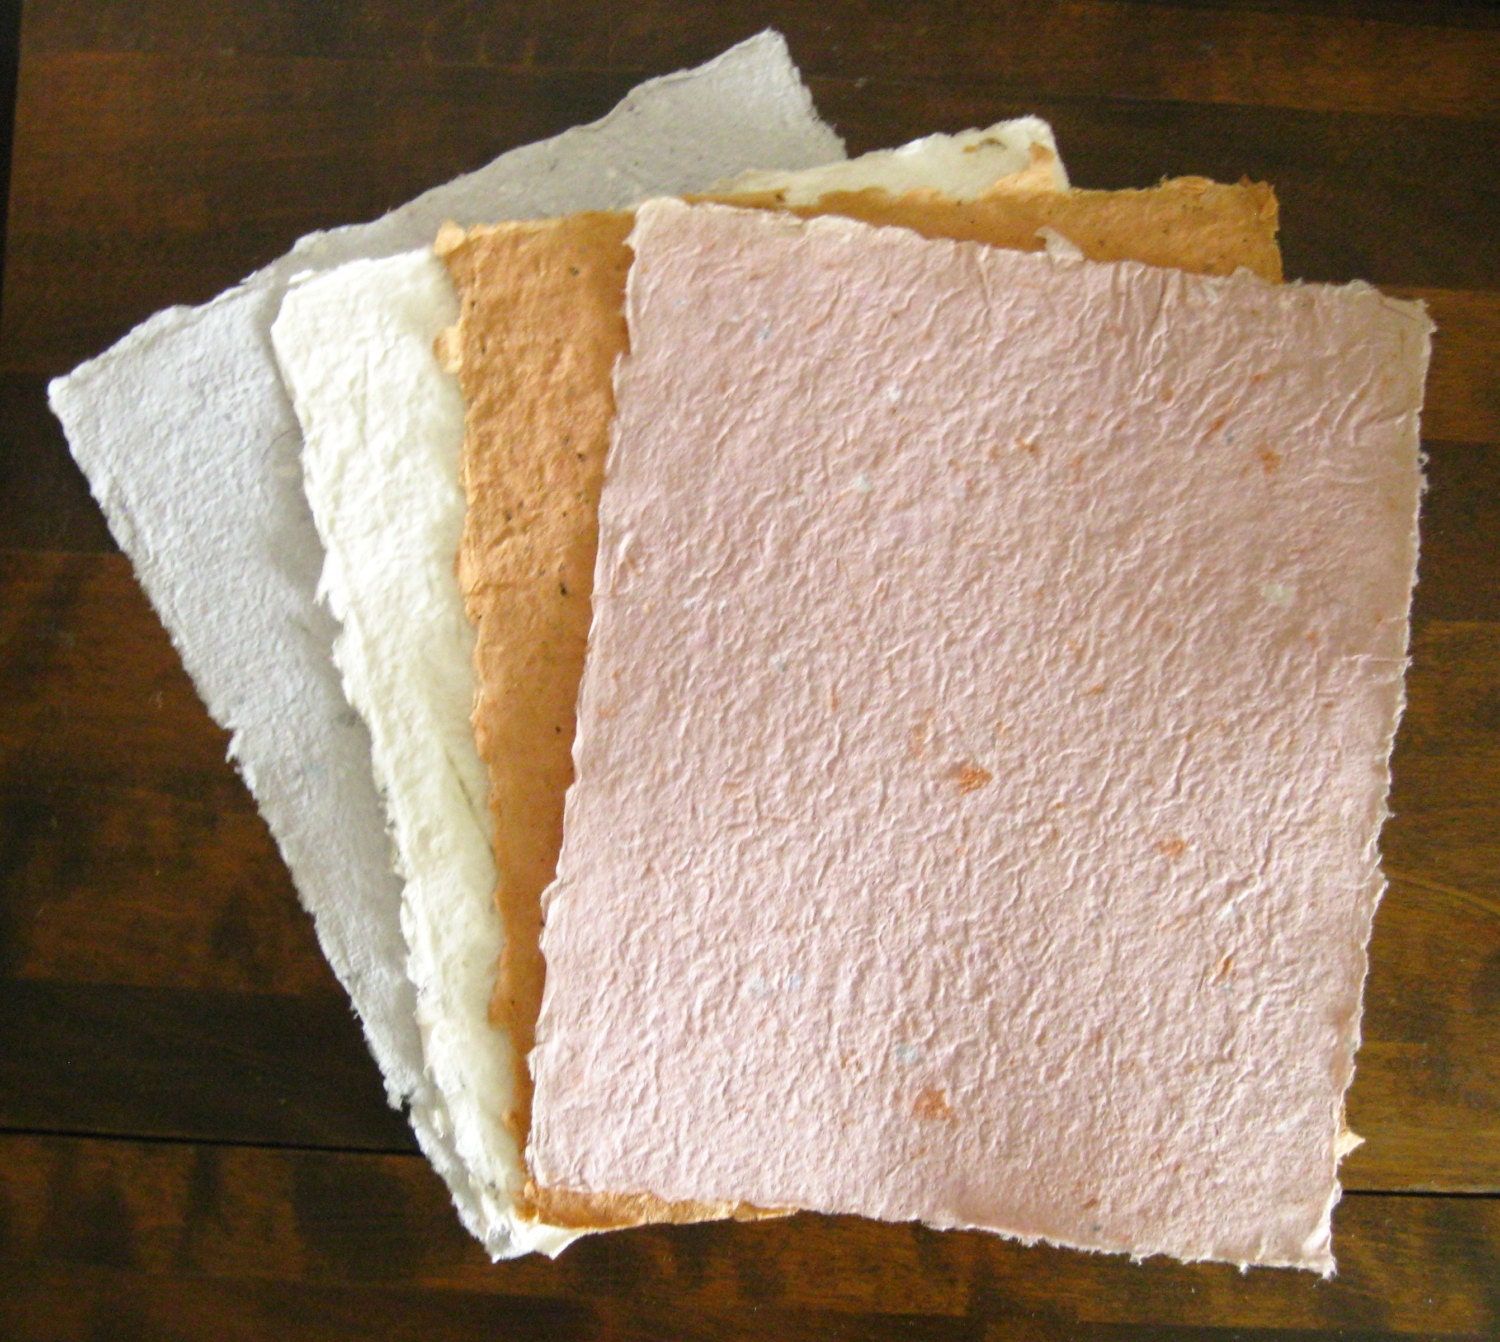 Art and Craft Supply. SALE. Handmade Paper. Lot of 4 Pieces of Artist Made Paper. Destash. Papermaking Collage Book Arts - kathleendaughan